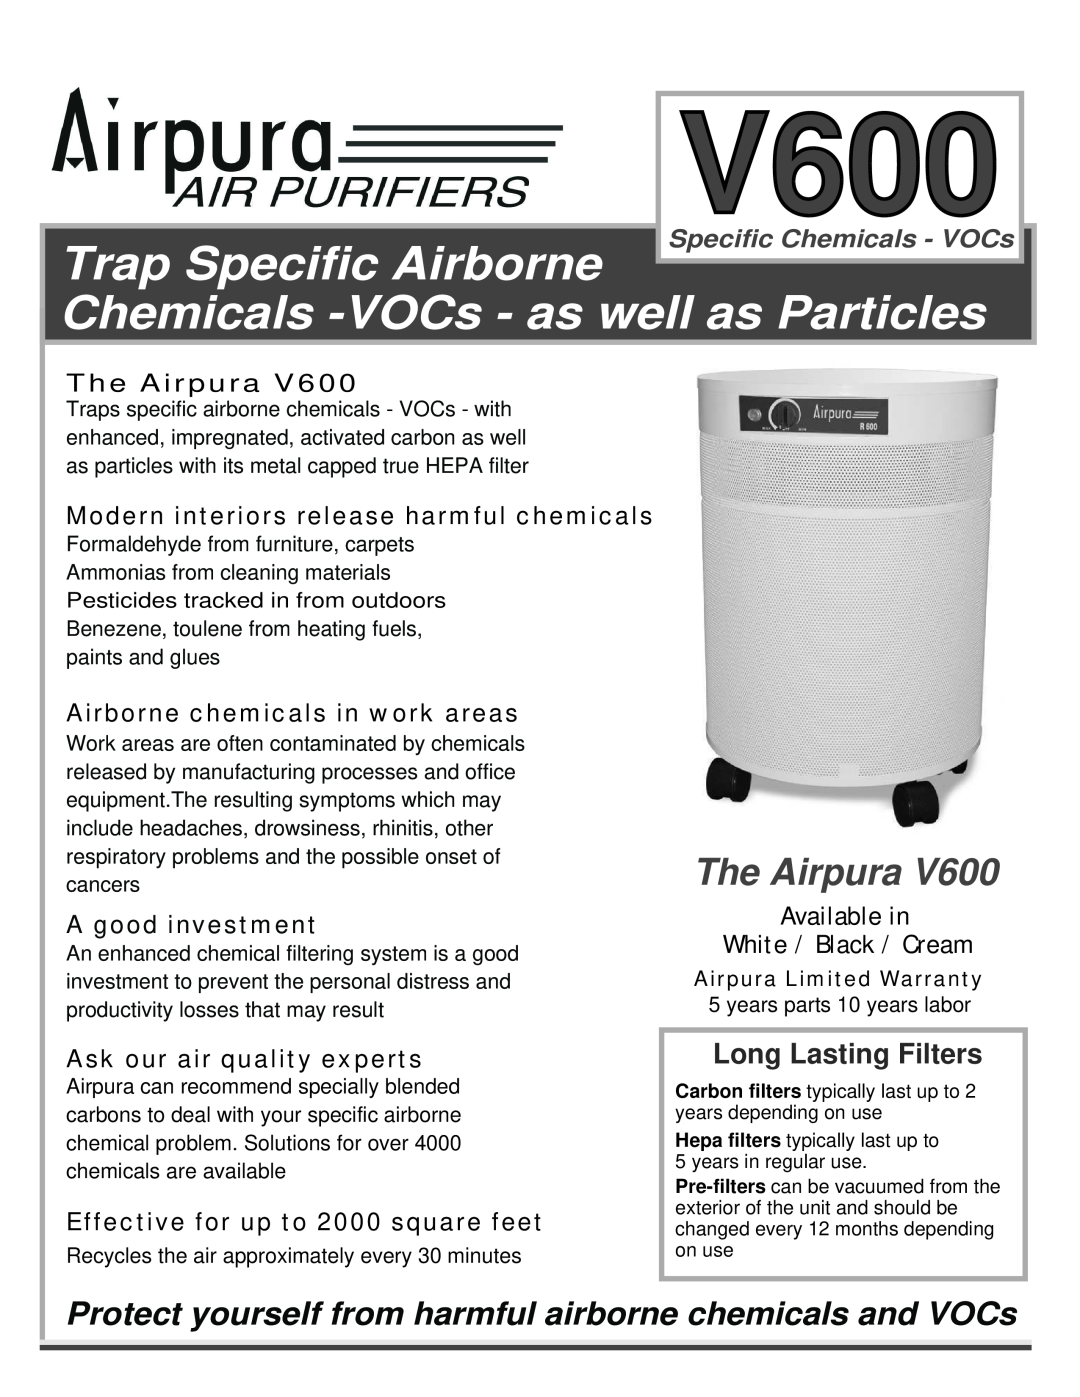 Airpura Industries V600 warranty Airpura Limited Warranty, Trap Specific Airborne, Chemicals -VOCs- as well as Particles 